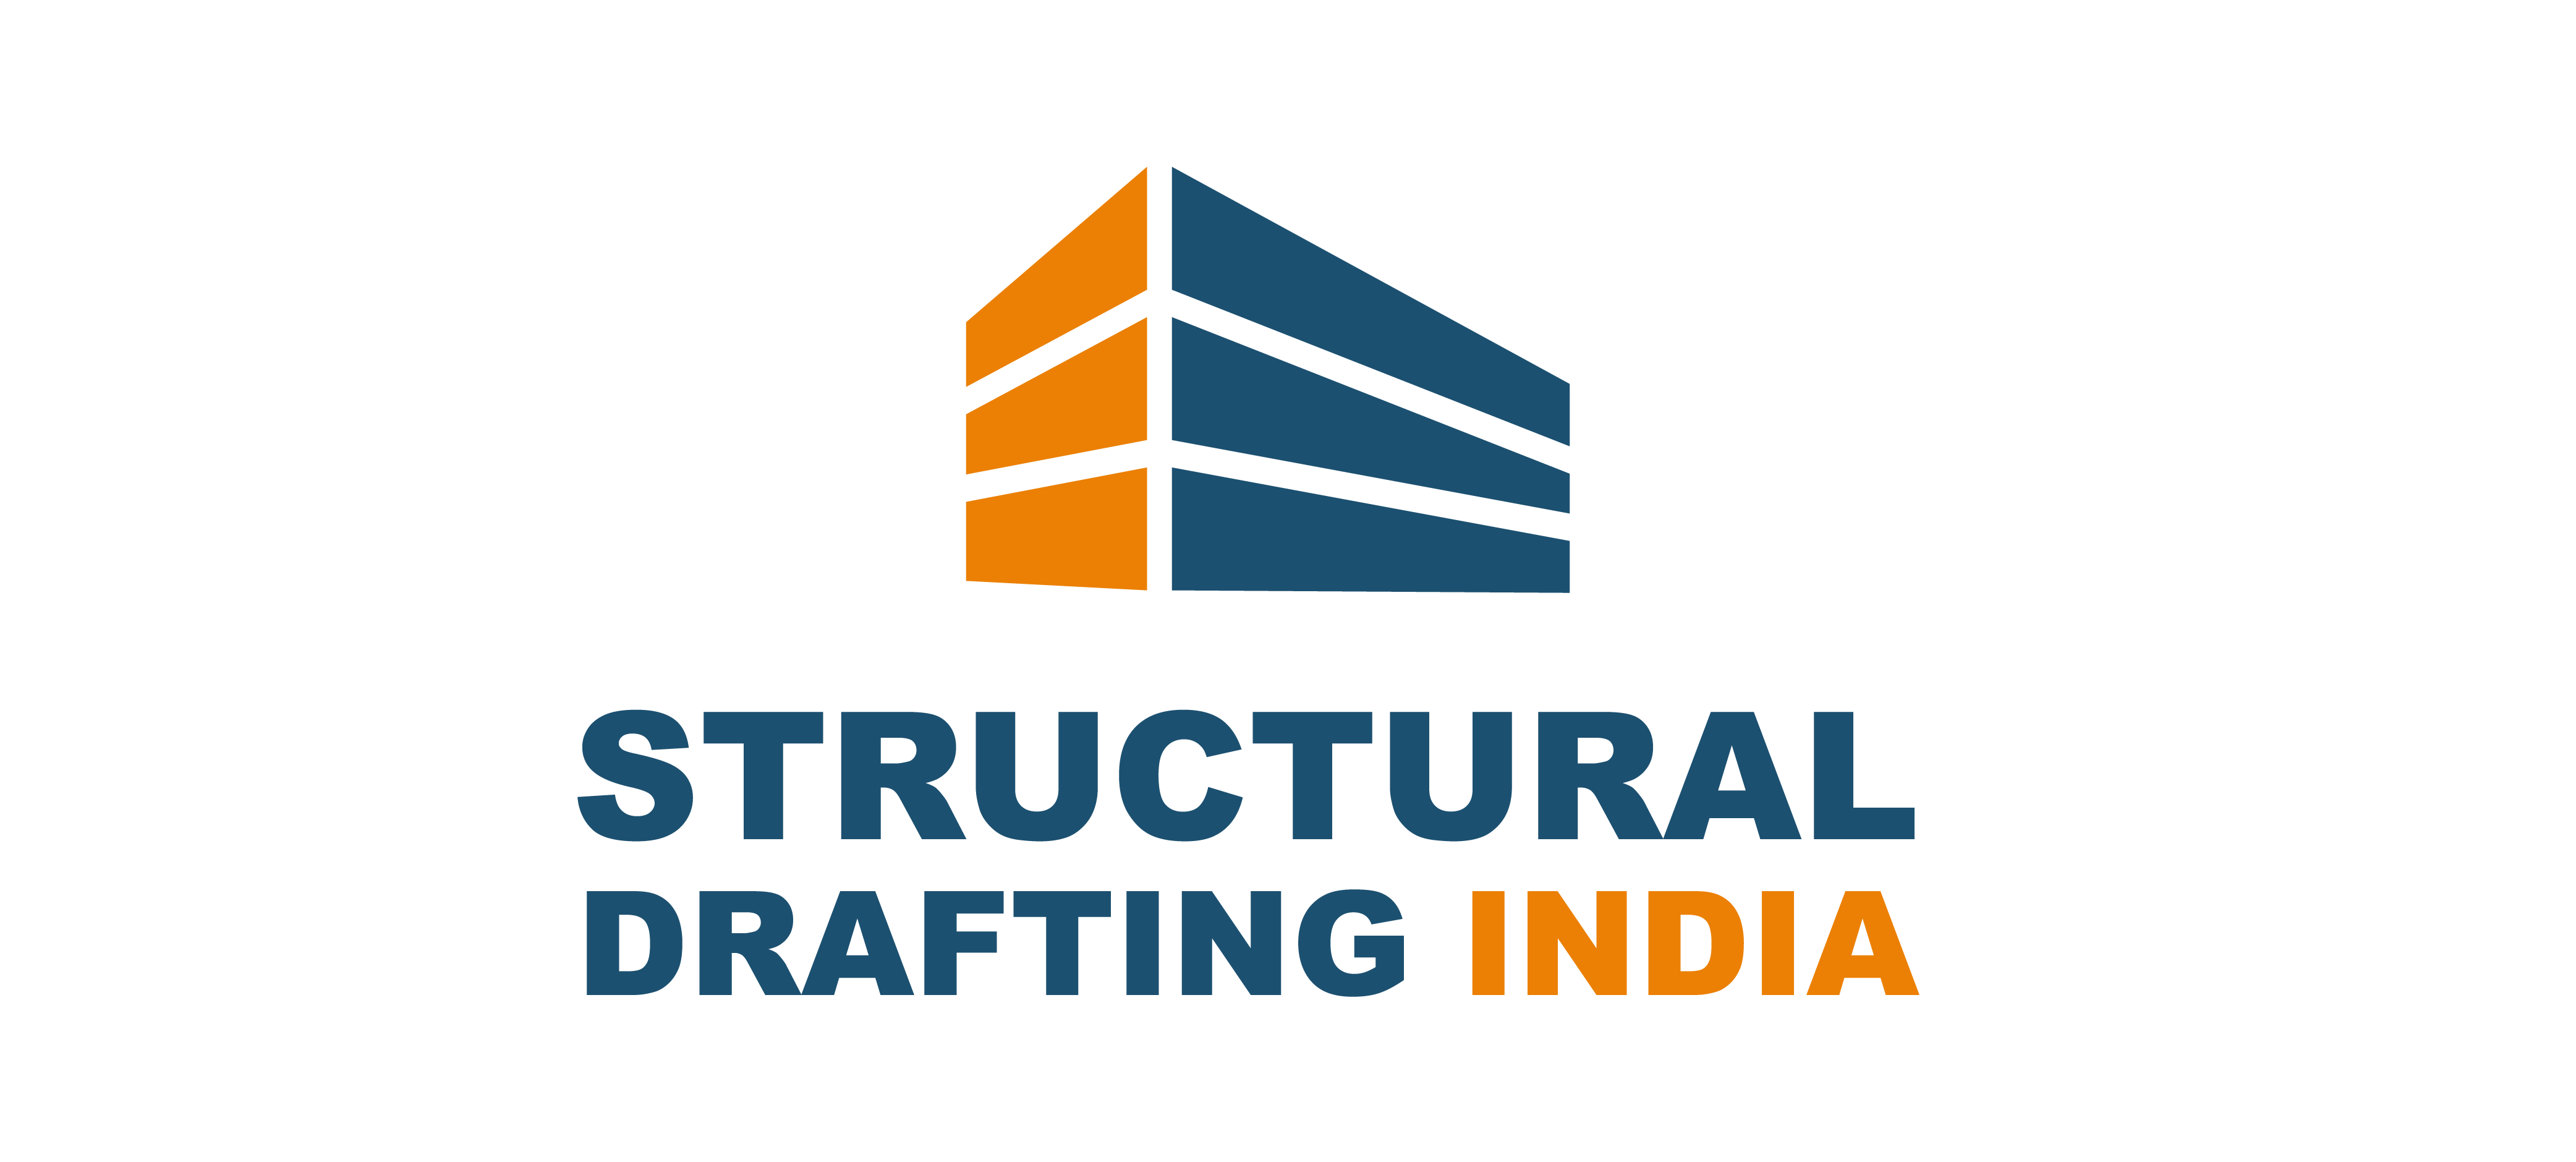 Structural Drafting India